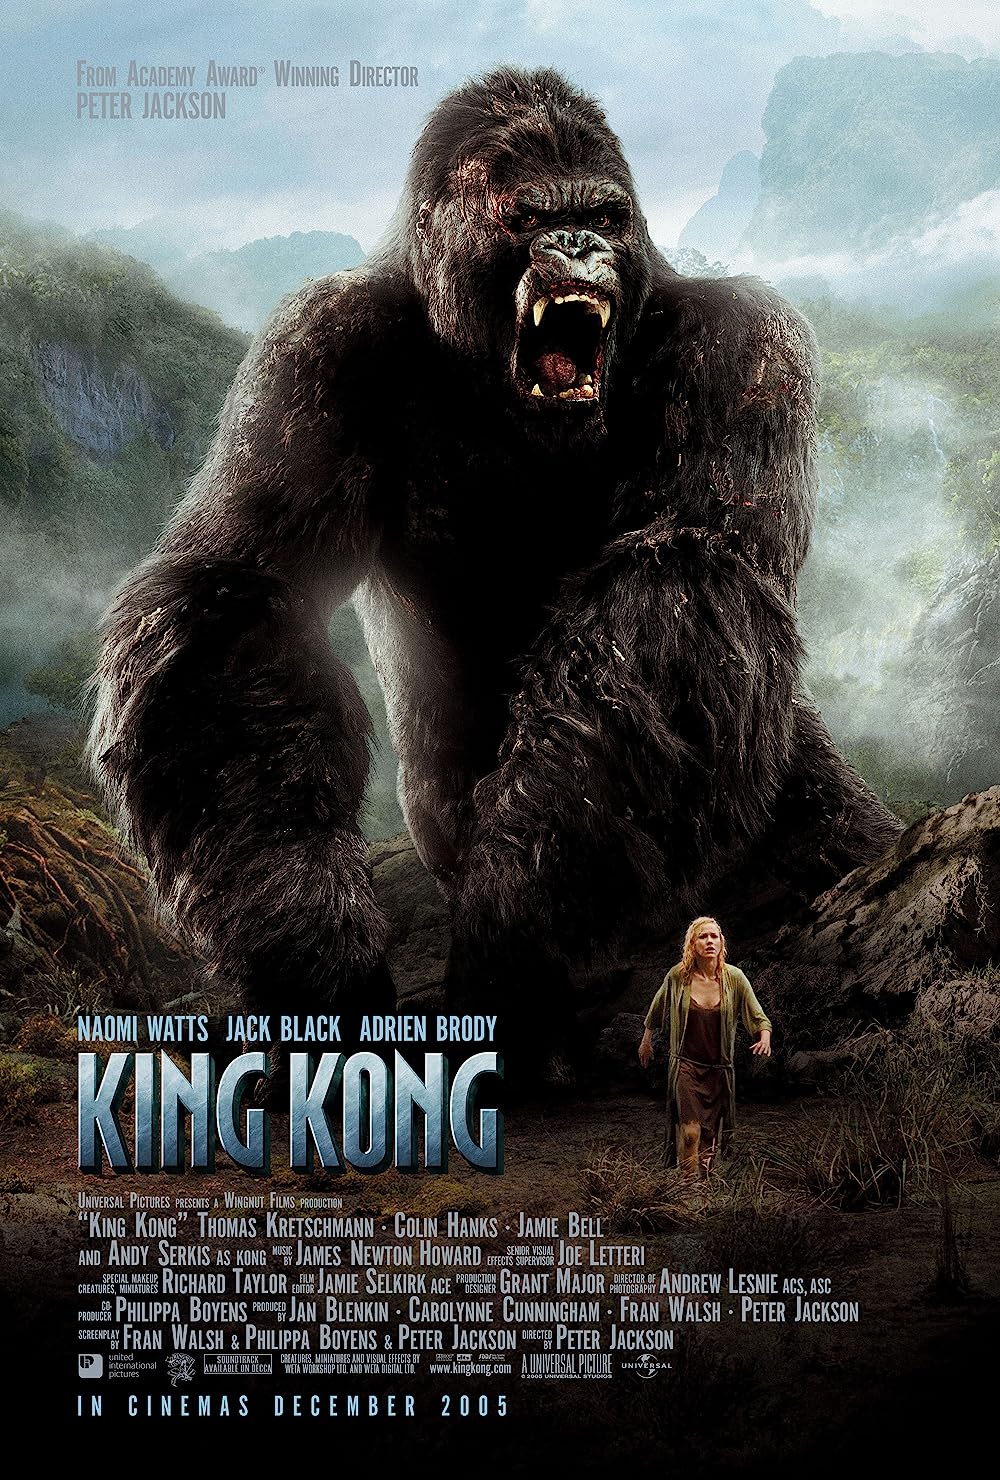 King kong Movie Review (2005 film)